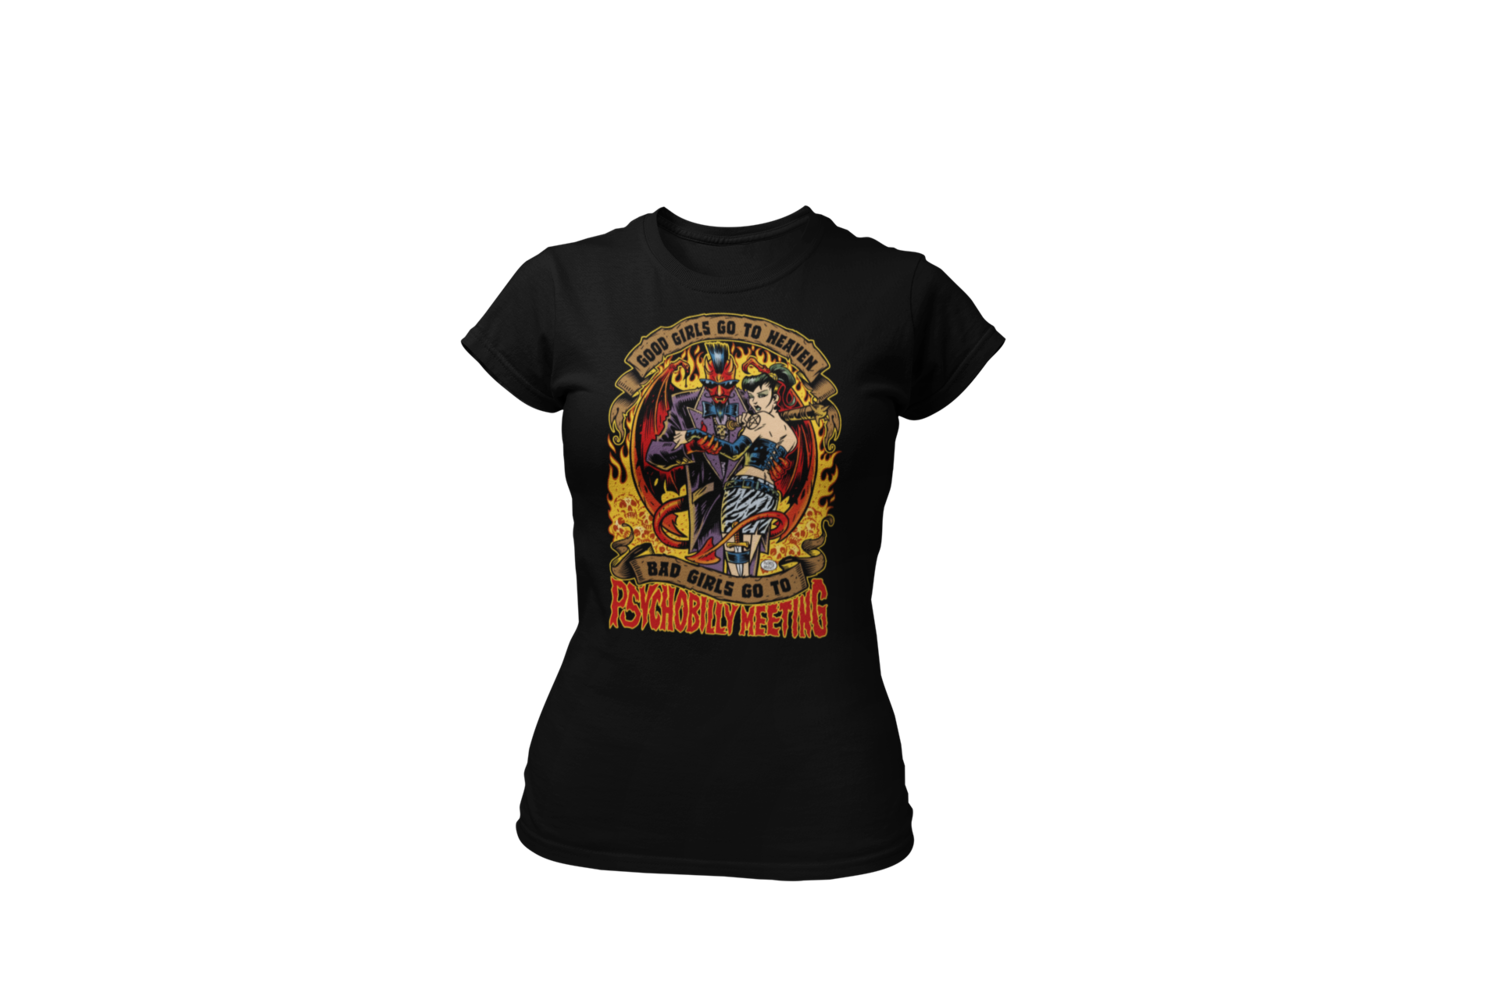 BAD GIRLS GO TO PSYCHOBILLY MEETING T-SHIRT WOMAN by PASKAL